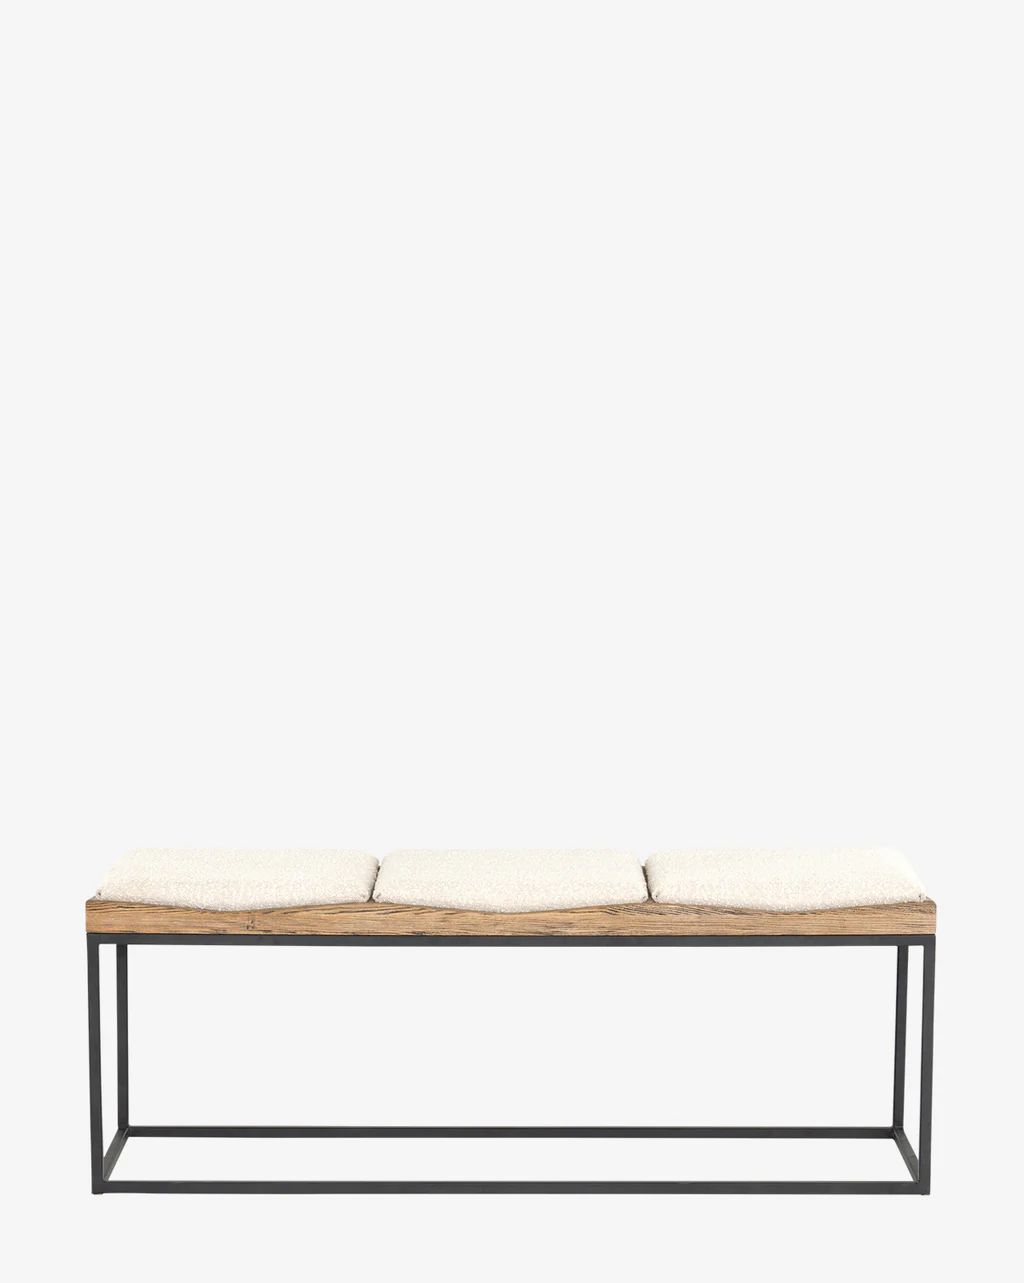 Holms Bench | McGee & Co.